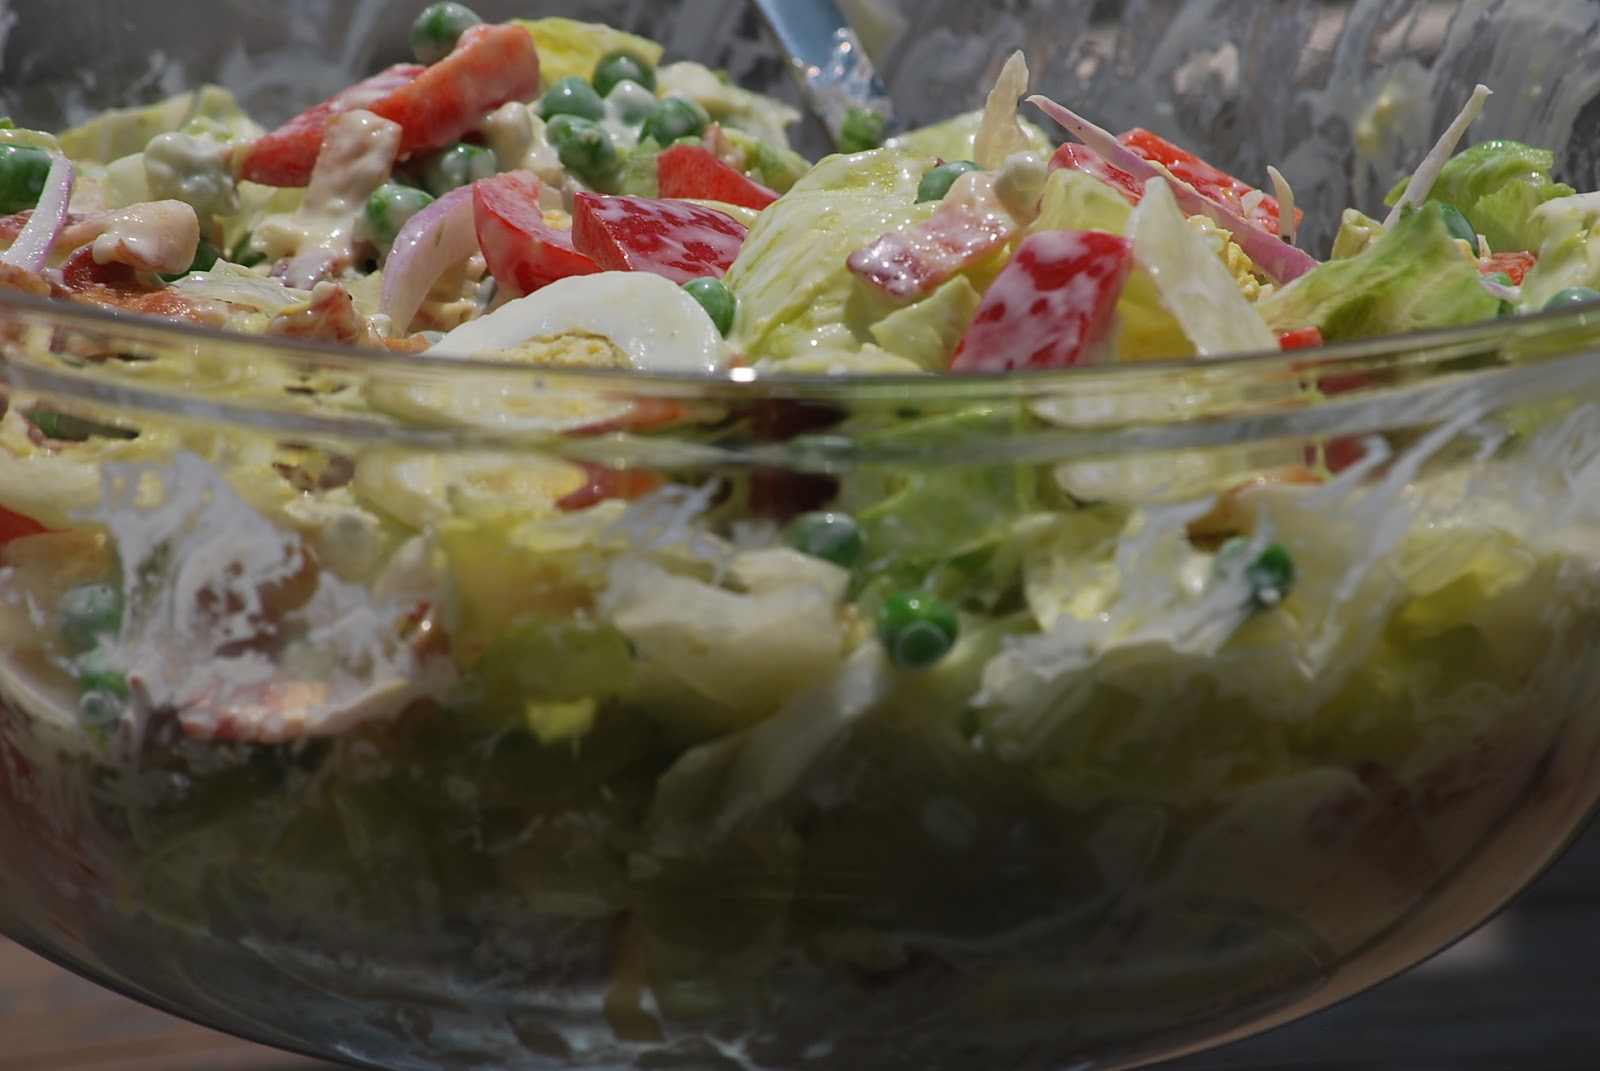 My story in recipes: Picnic Salad